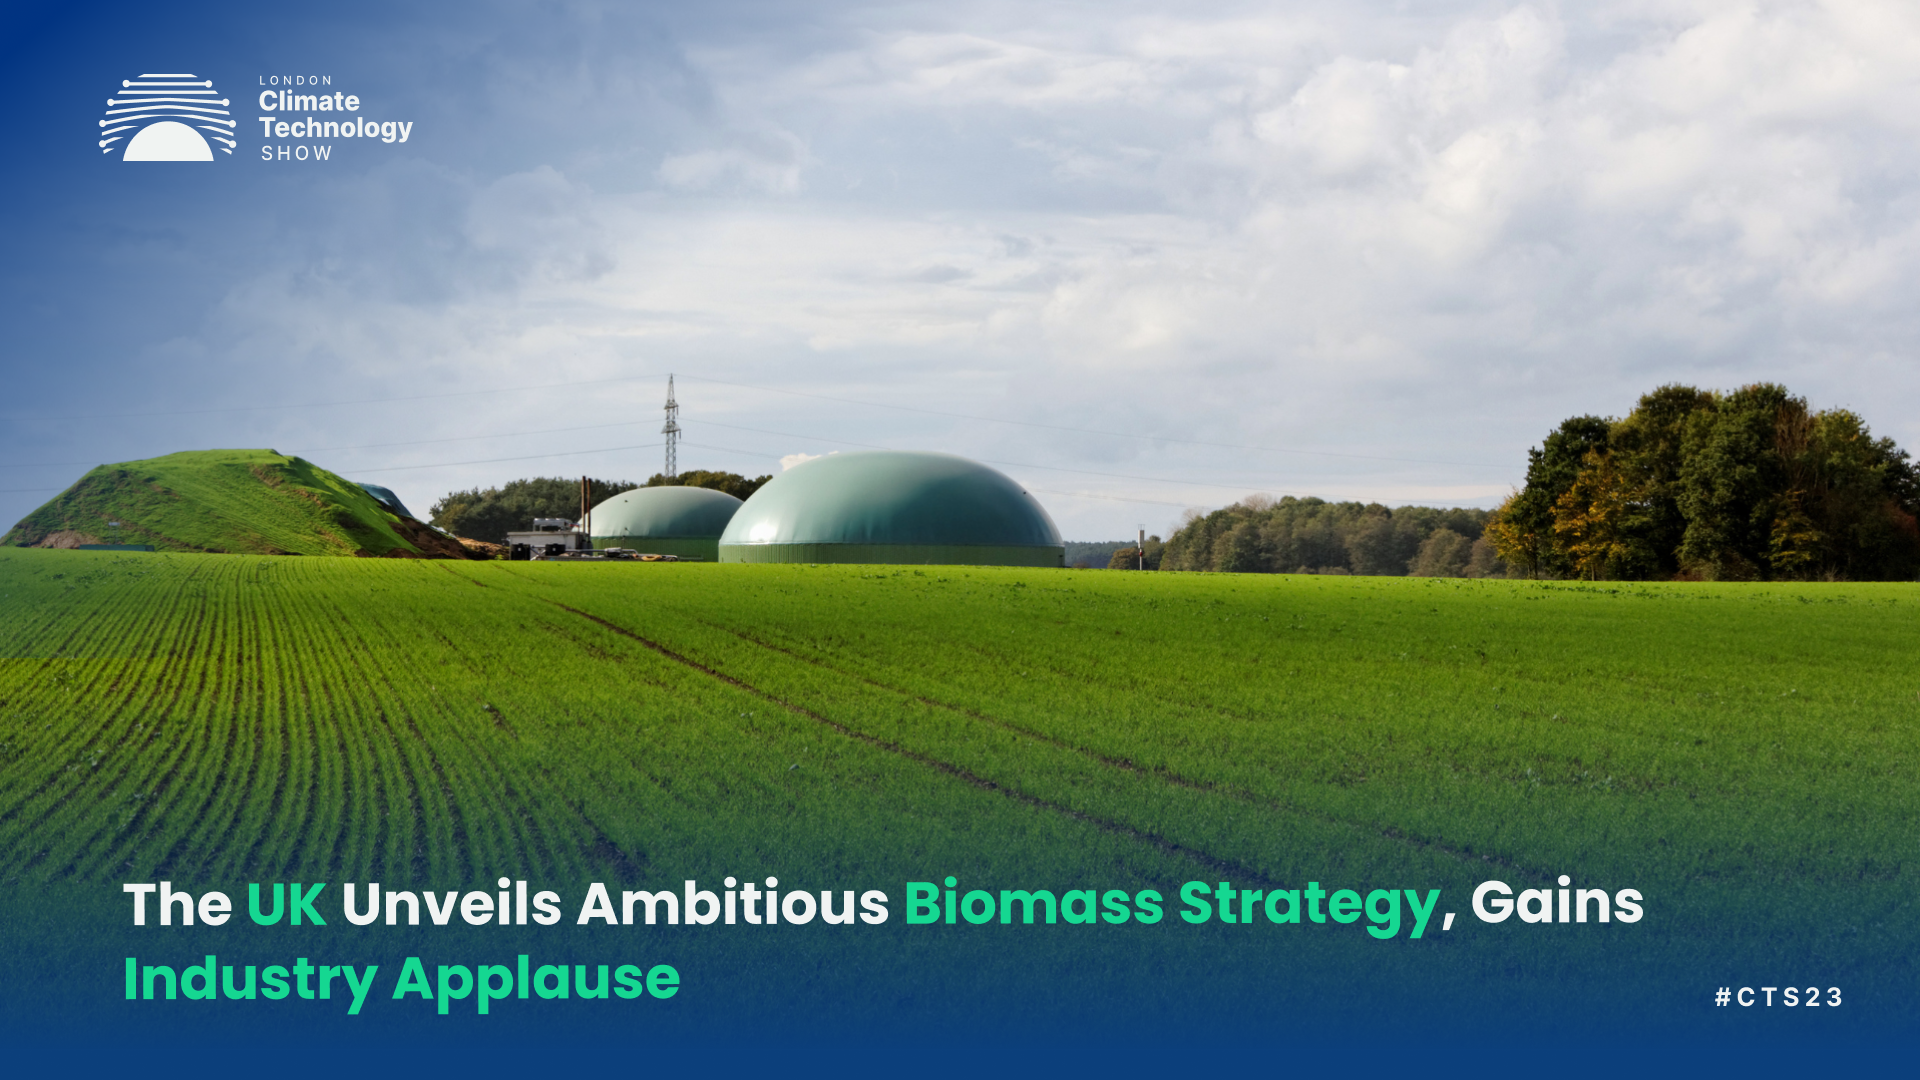 The UK Unveils Ambitious Biomass Strategy, Gains Industry Applause